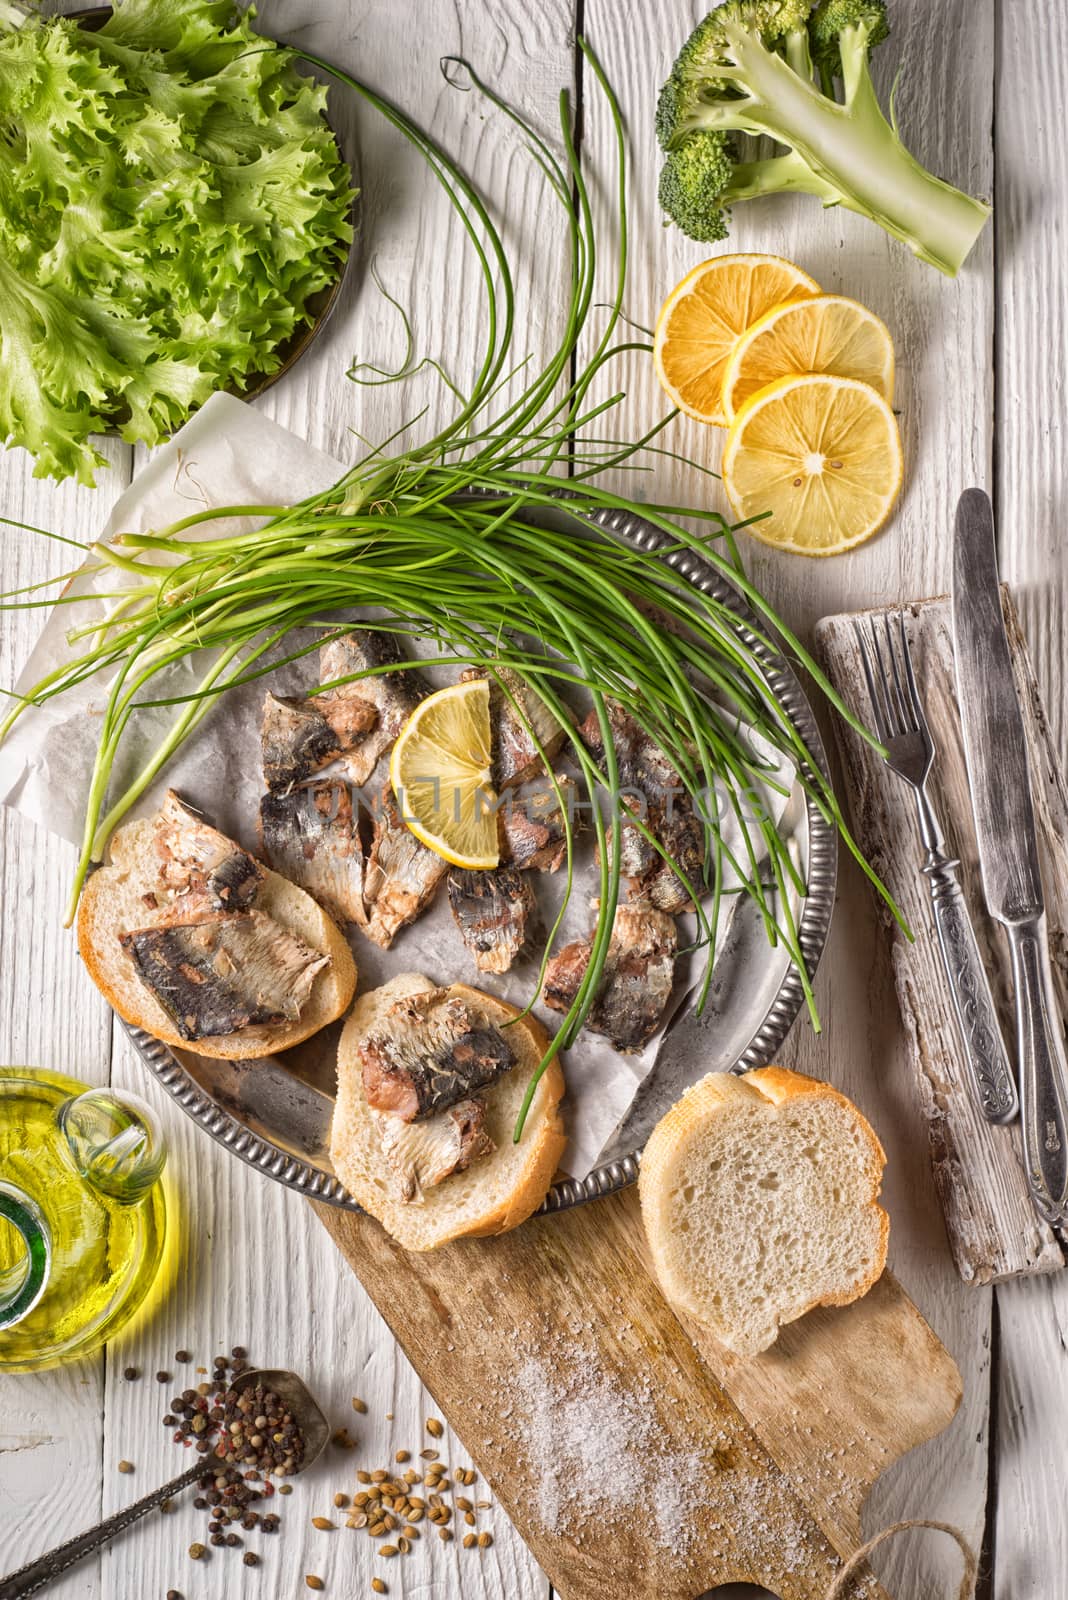 Fresh greens, sardines, bread on a wooden table vertical